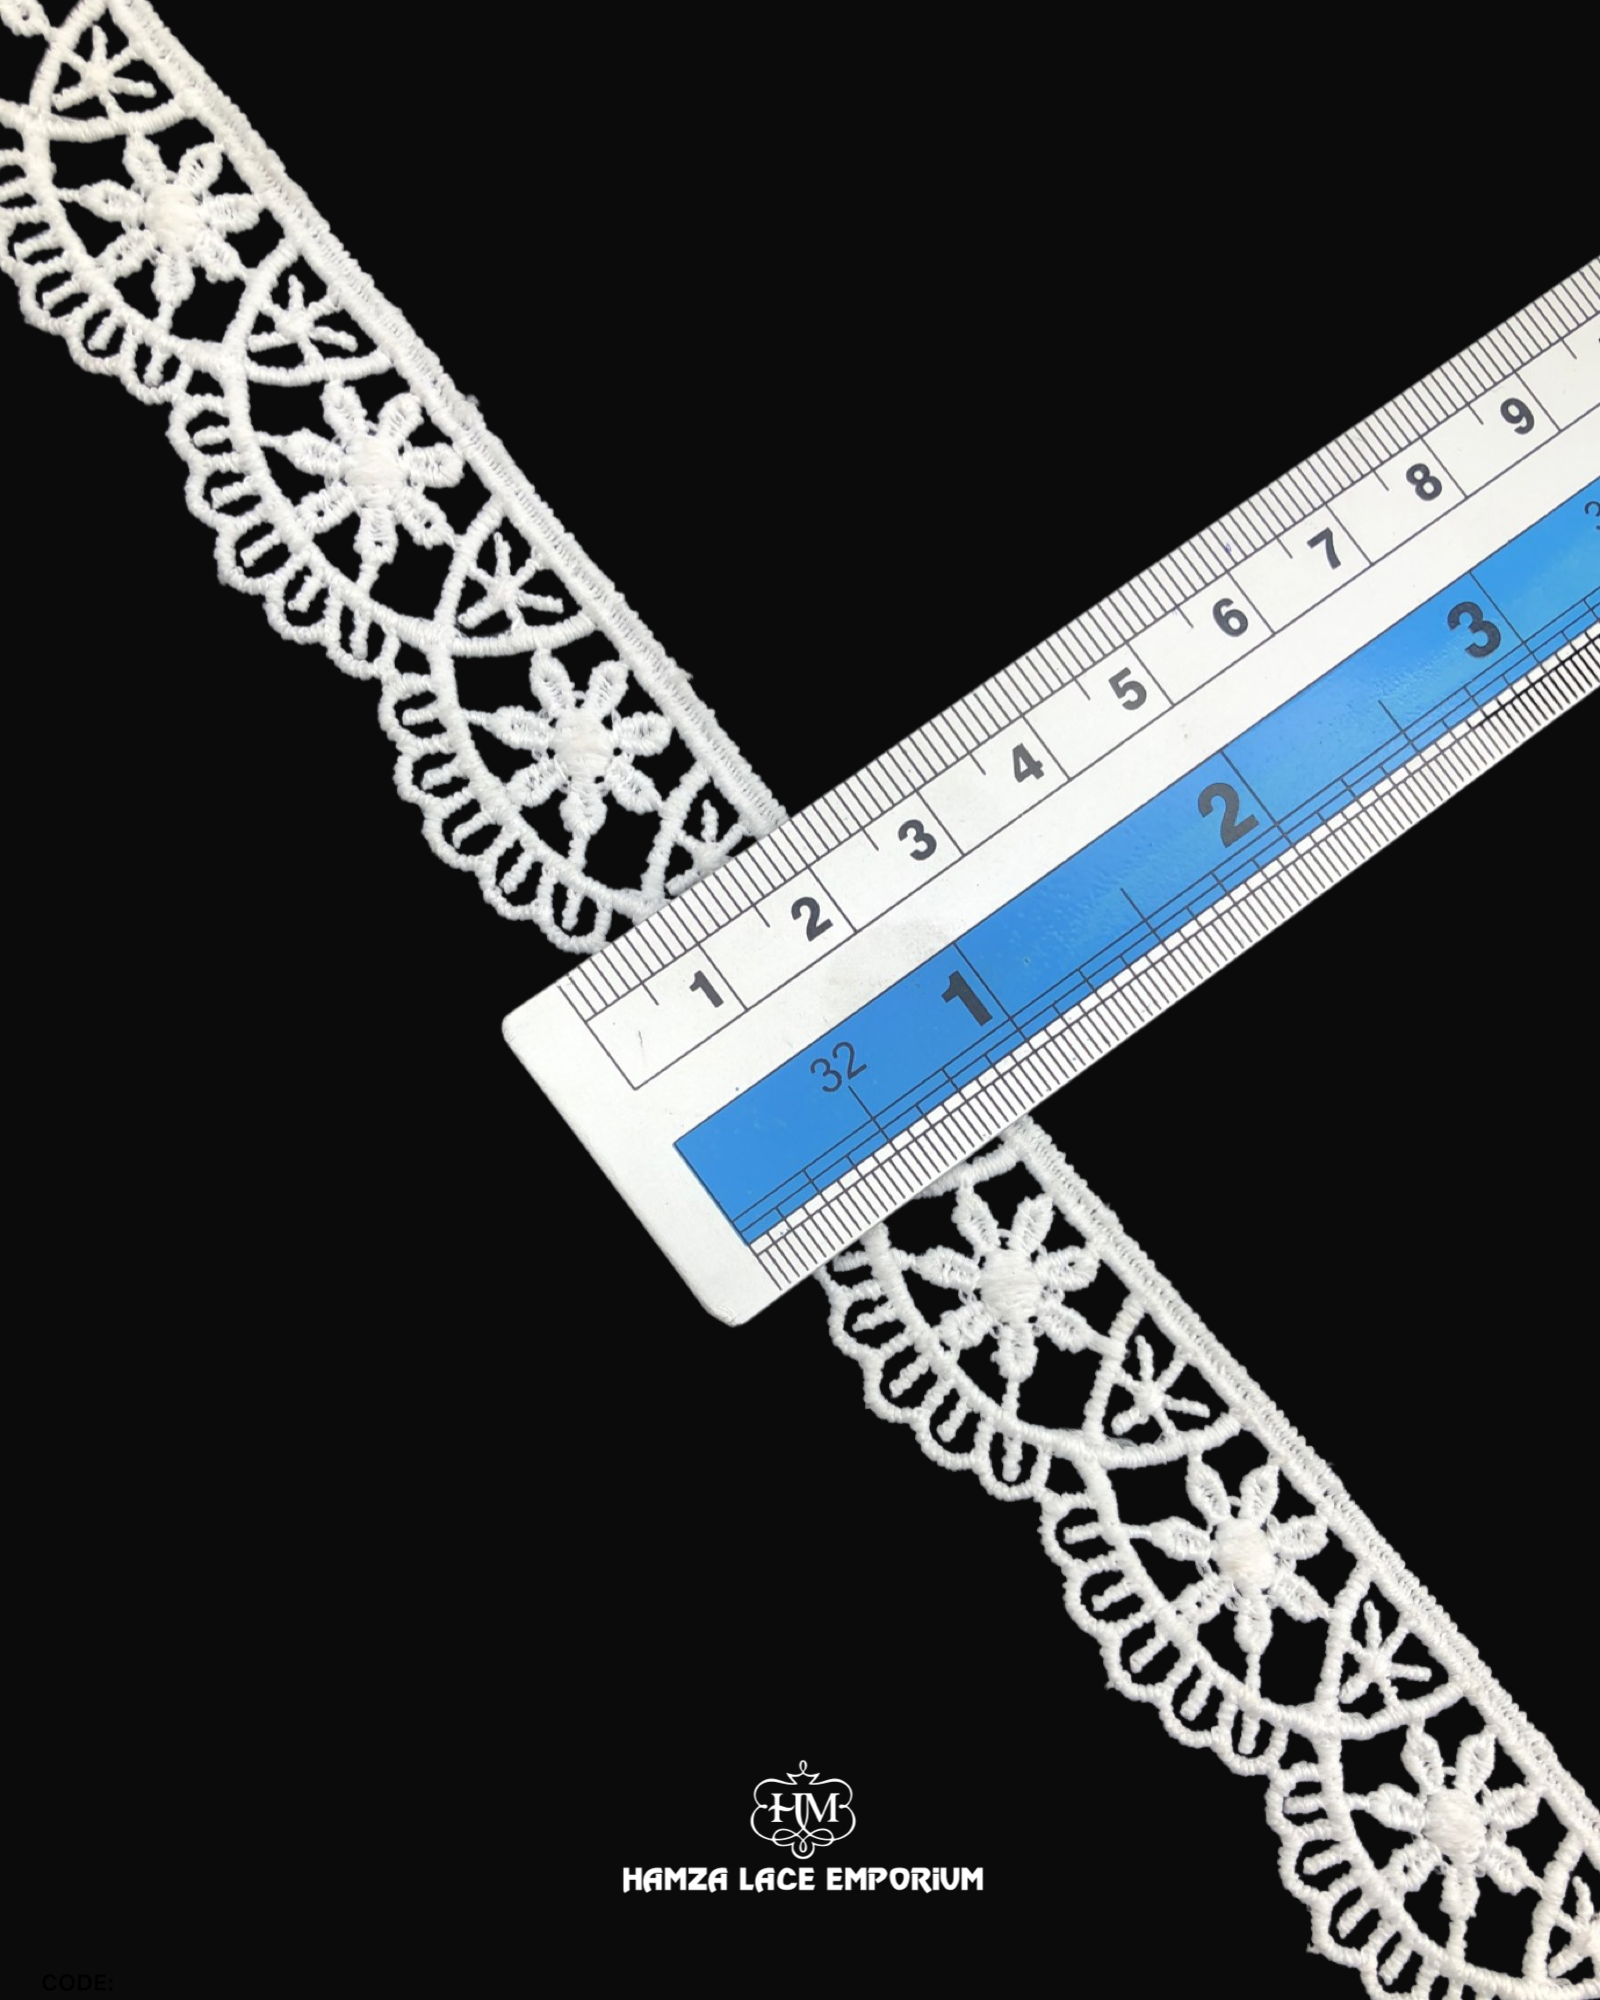 The size of the 'Edging Scallop Lace 6366' is shown with the help of a ruler